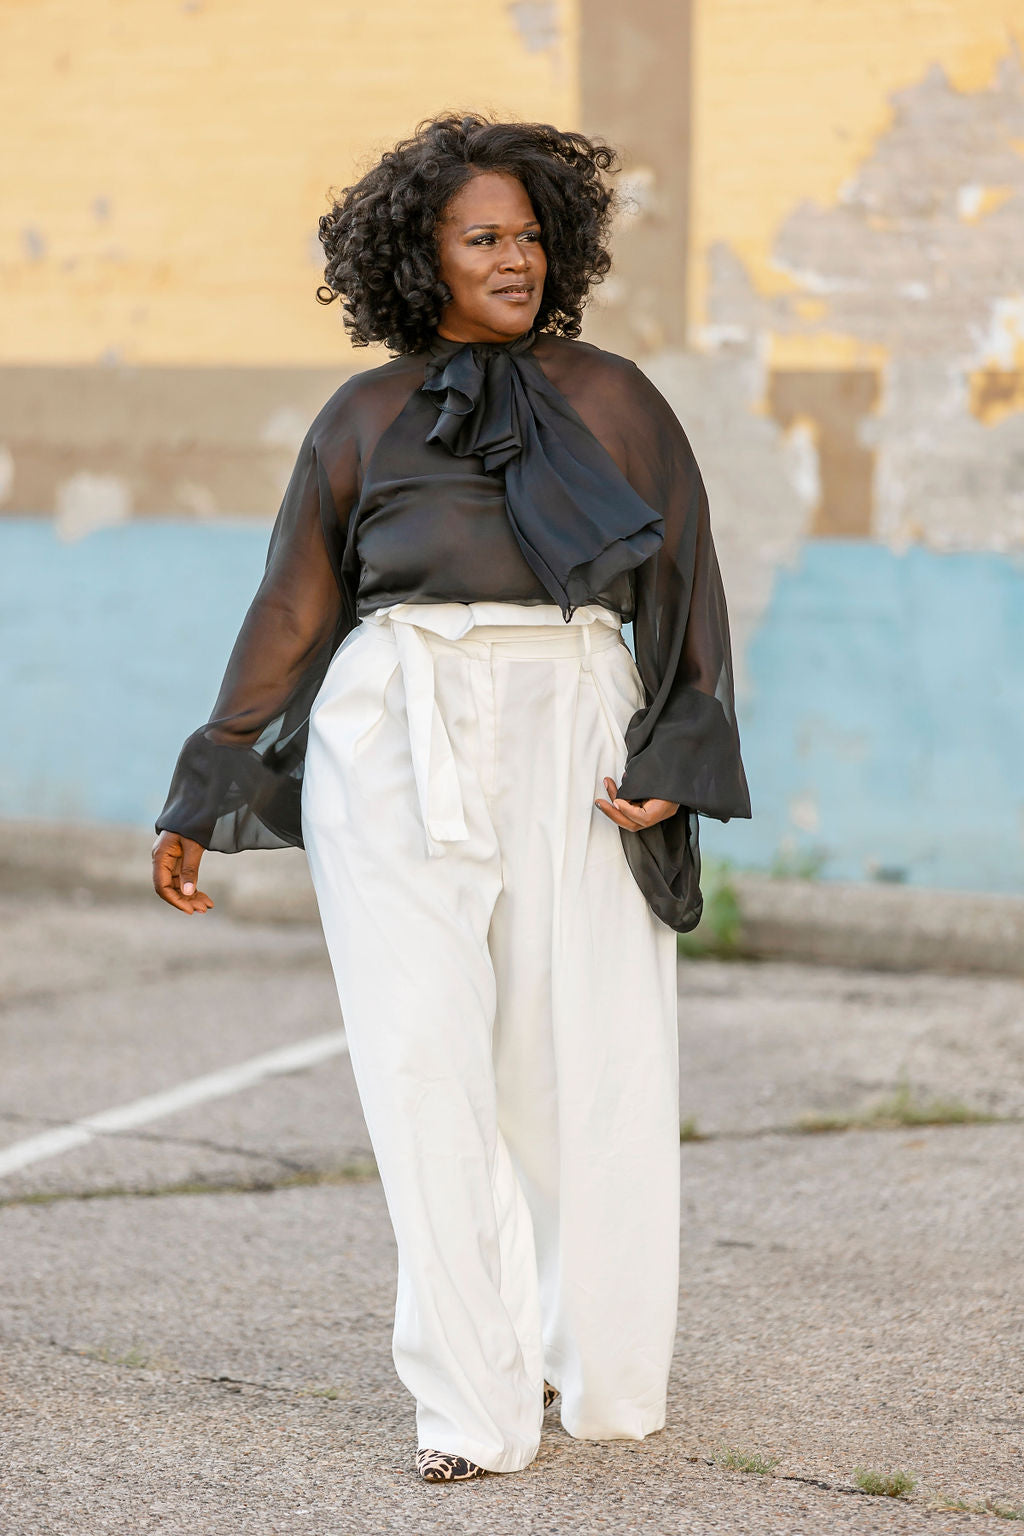 Old Hollywood Glam Pants – ALL N The Detailz